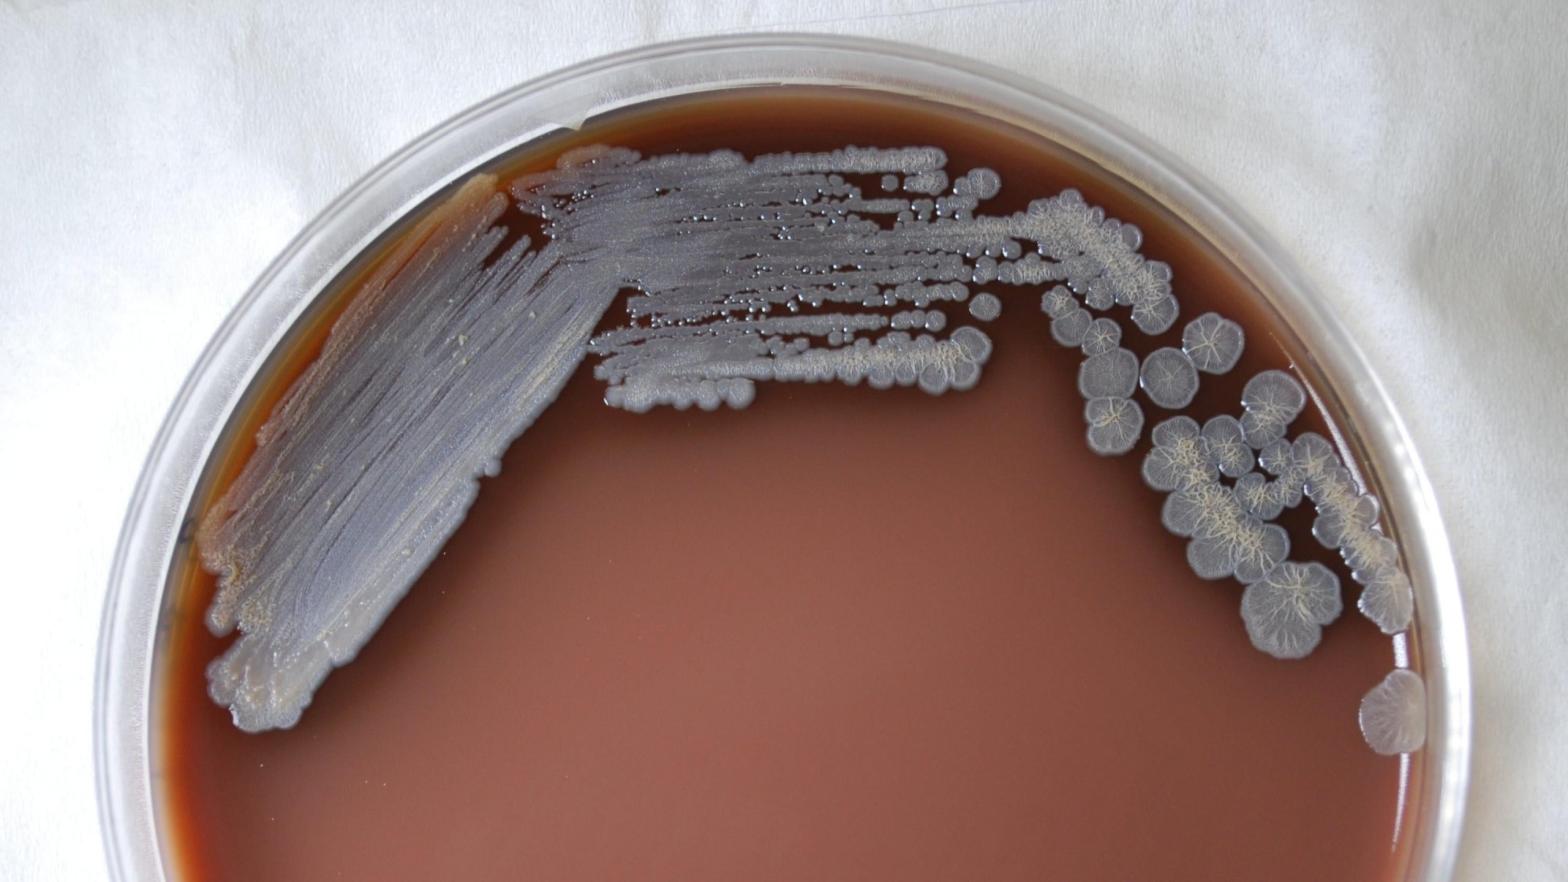 A photo of Burkholderia pseudomallei cultured in chocolate agar after three days time (Photo: Todd Parker/CDC)